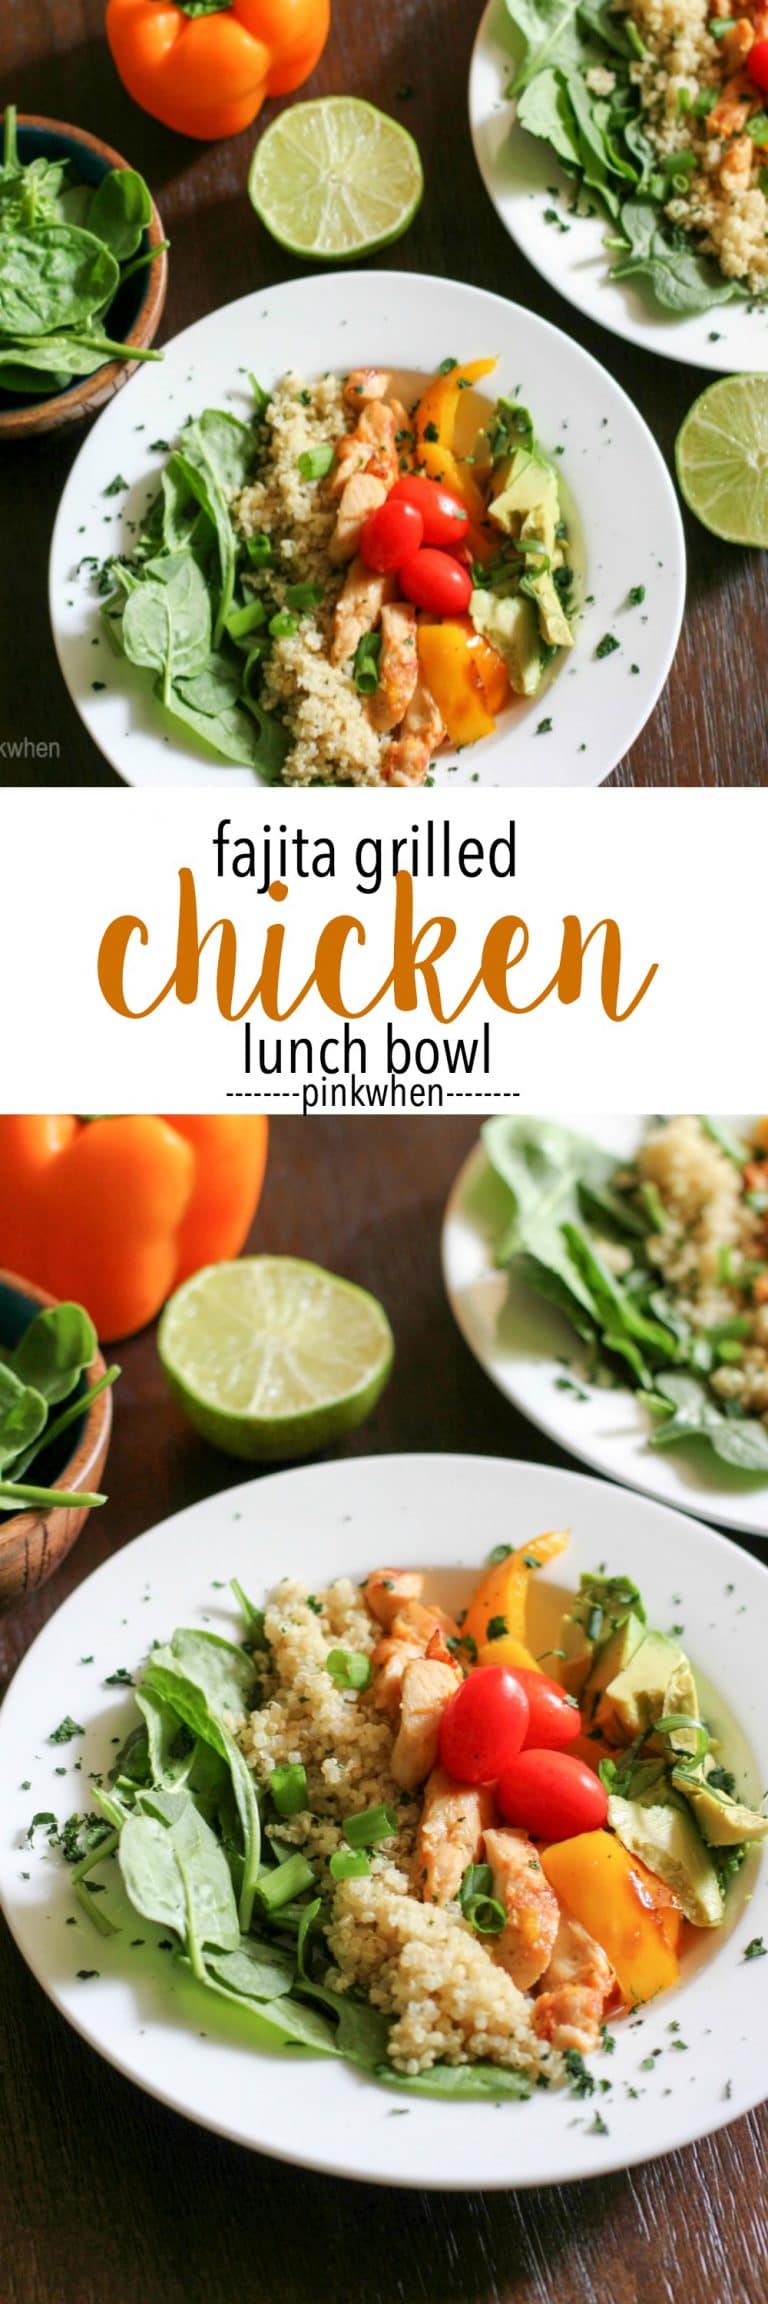 Fajita Grilled Chicken Lunch Bowl - the most delicious lunch ever! Made with grilled fajita meat, avocado, bell peppers, cherry tomatoes, quinoa, and topped with a little cilantro.